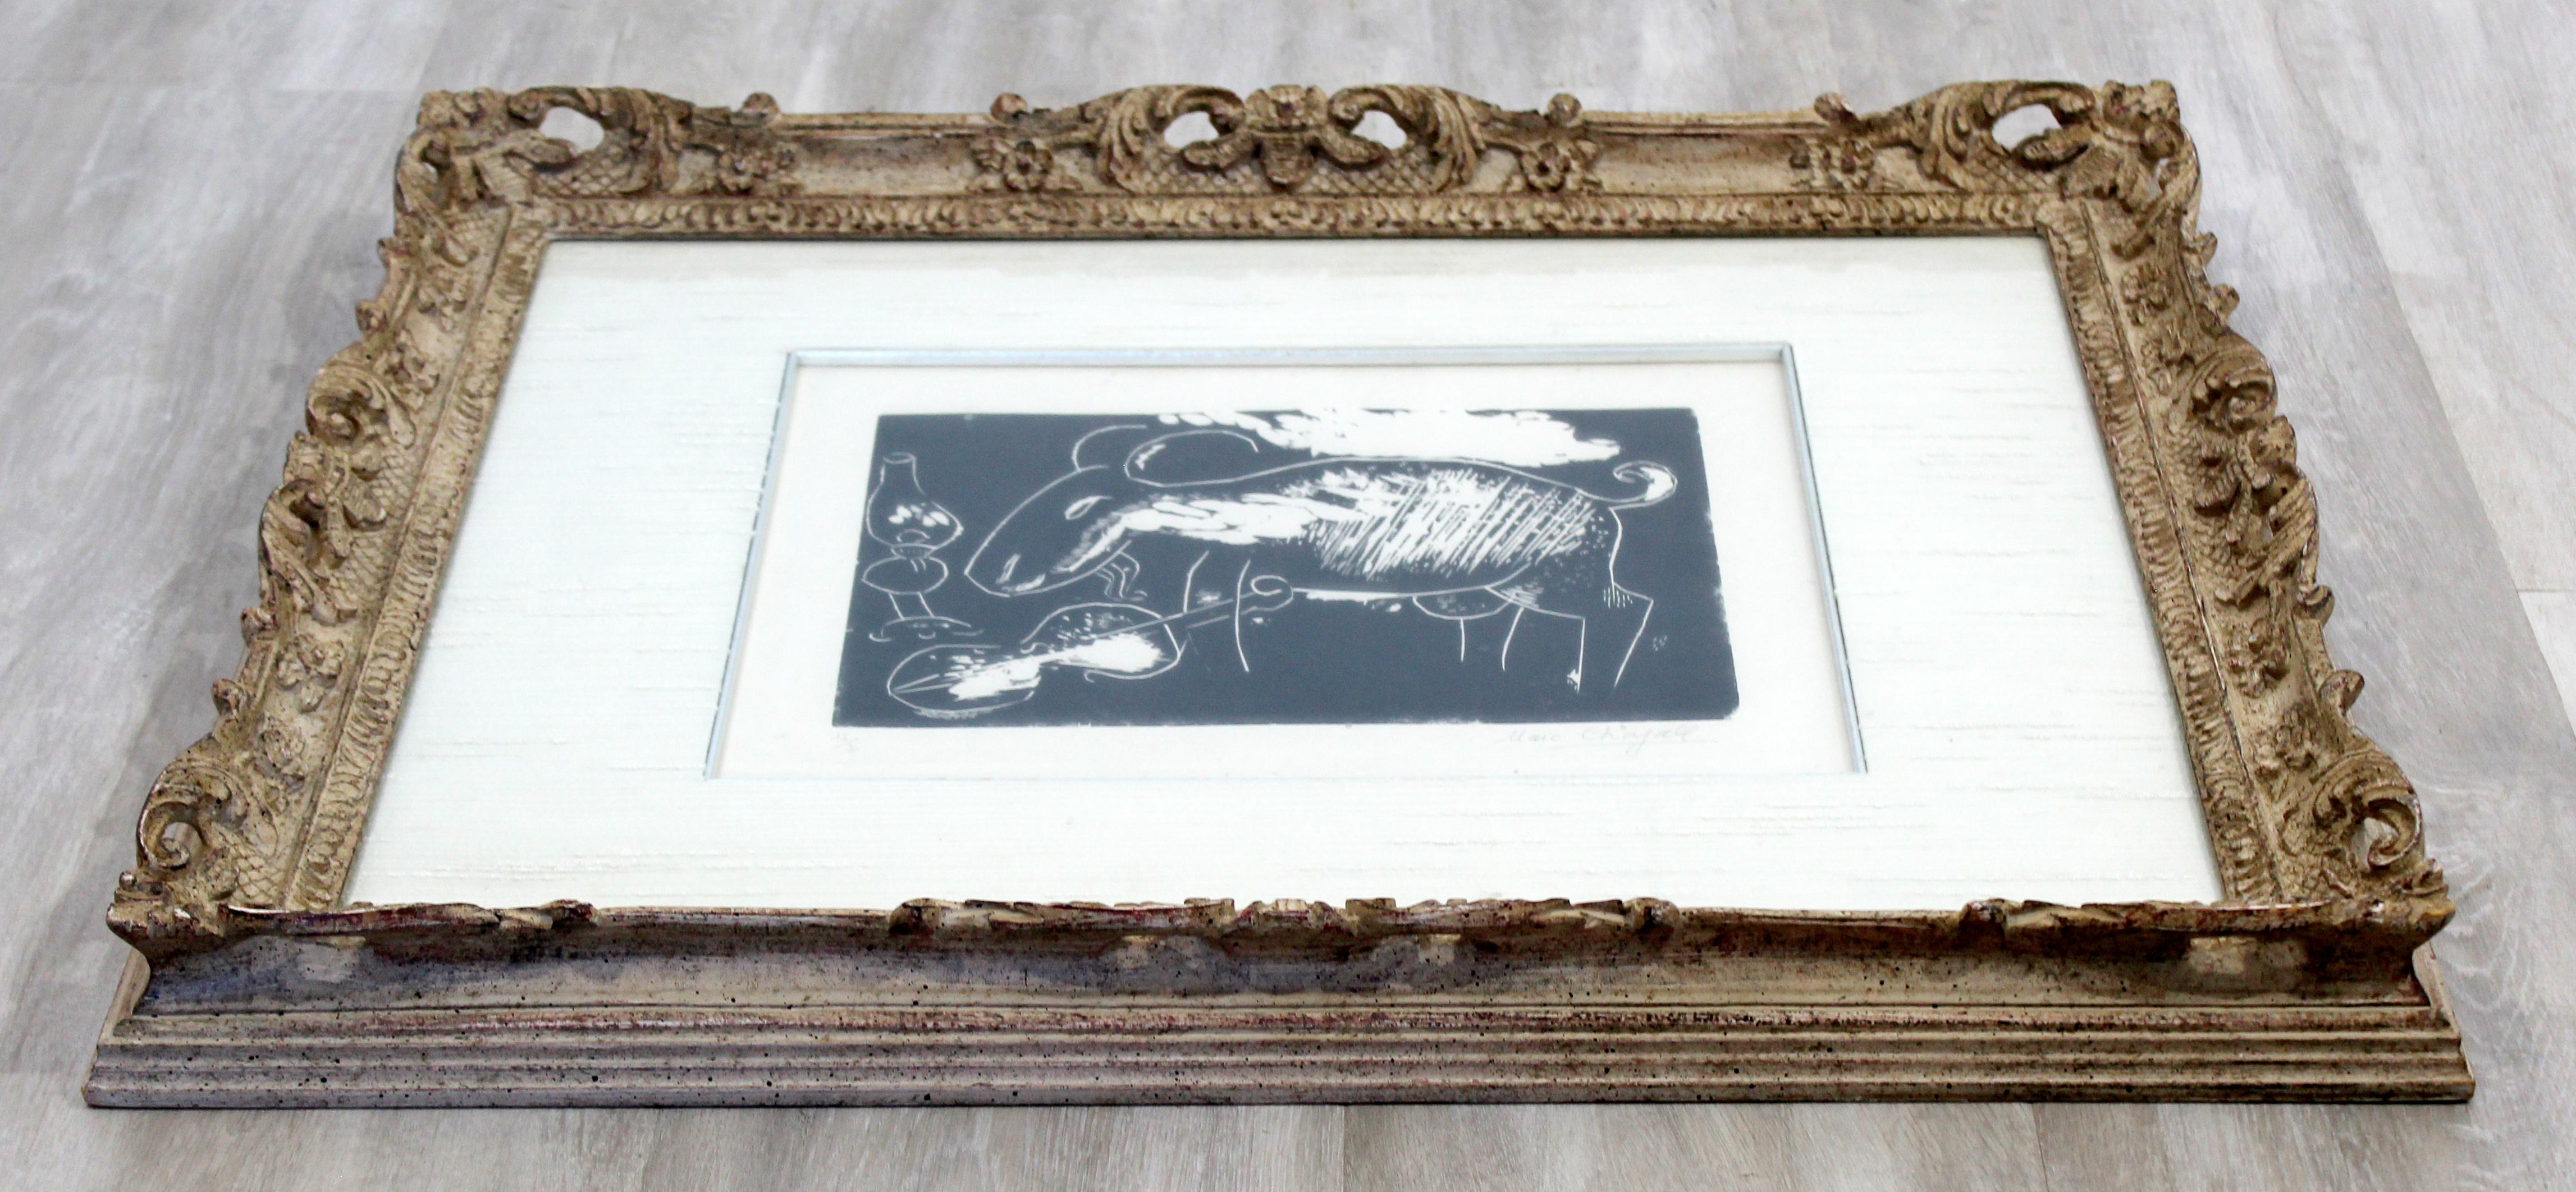 Ziege Mit Geige a Framed Woodcut by Marc Chagall Signed and Numbered 12/20 In Good Condition For Sale In Keego Harbor, MI